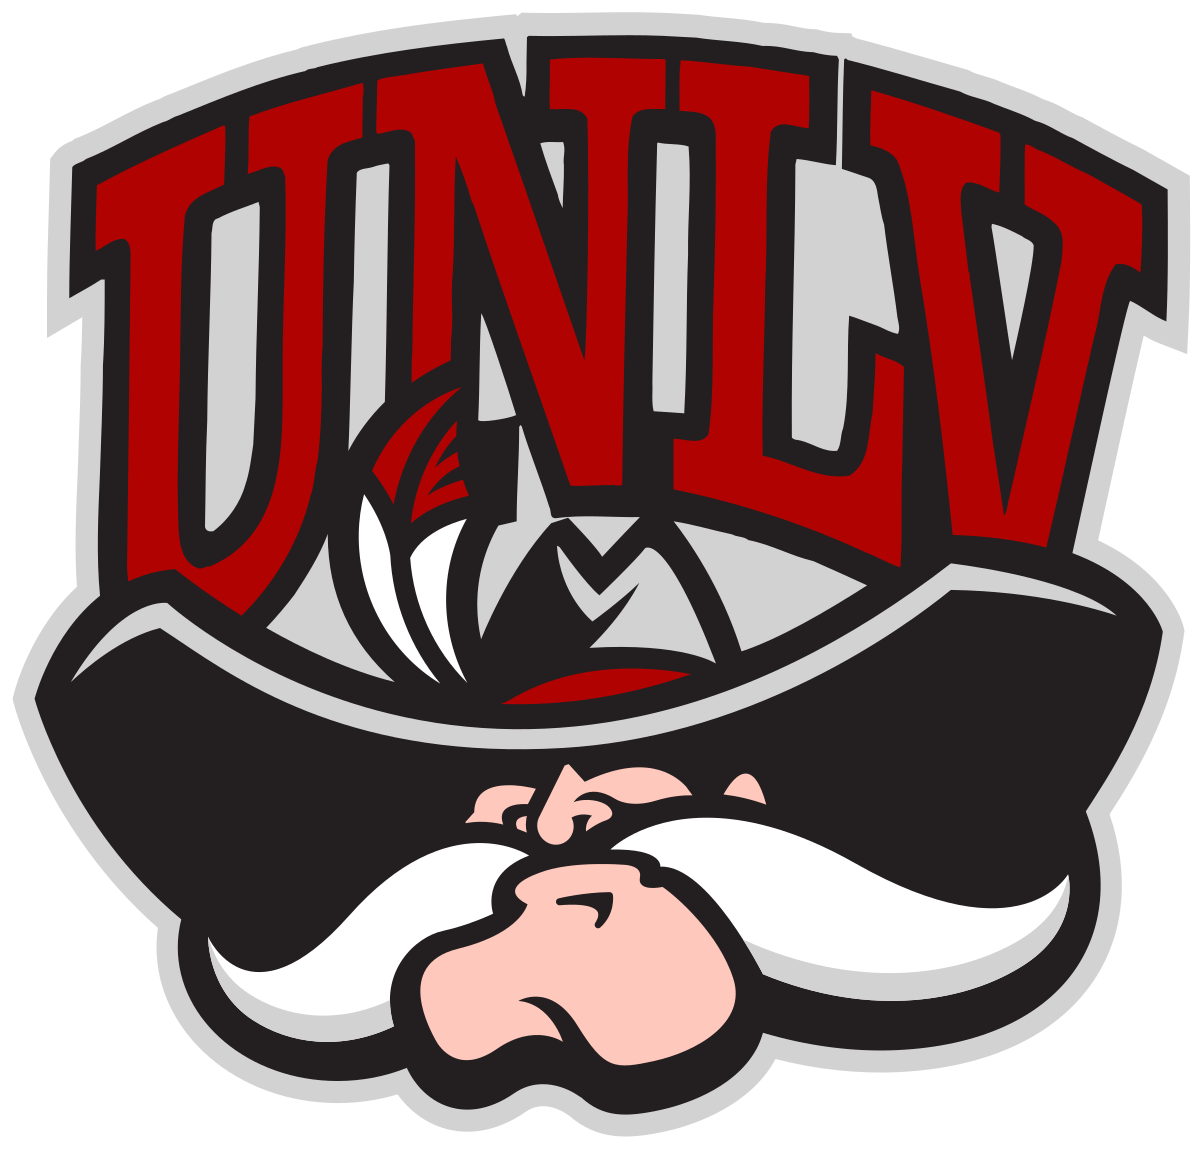 UNLV Logo - New UNLV logo has a giant mustache flowing majestically among ...